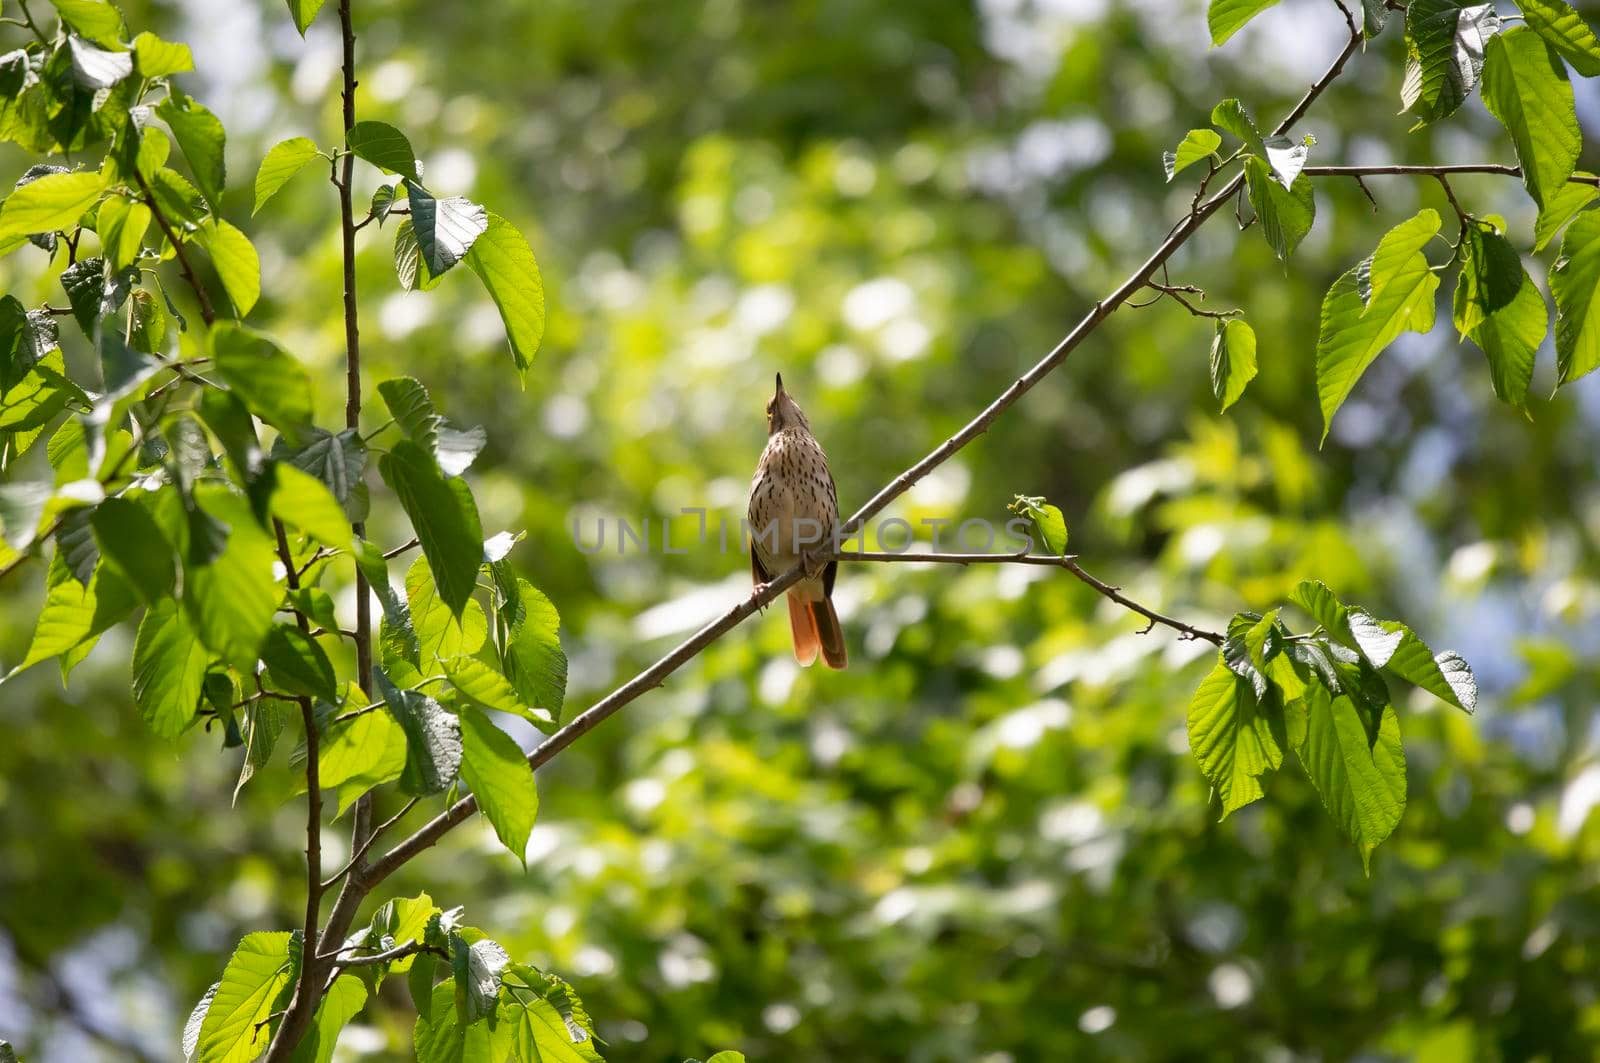 Brown thrasher (Toxostoma rufum) looking up from its perch on a tree branch